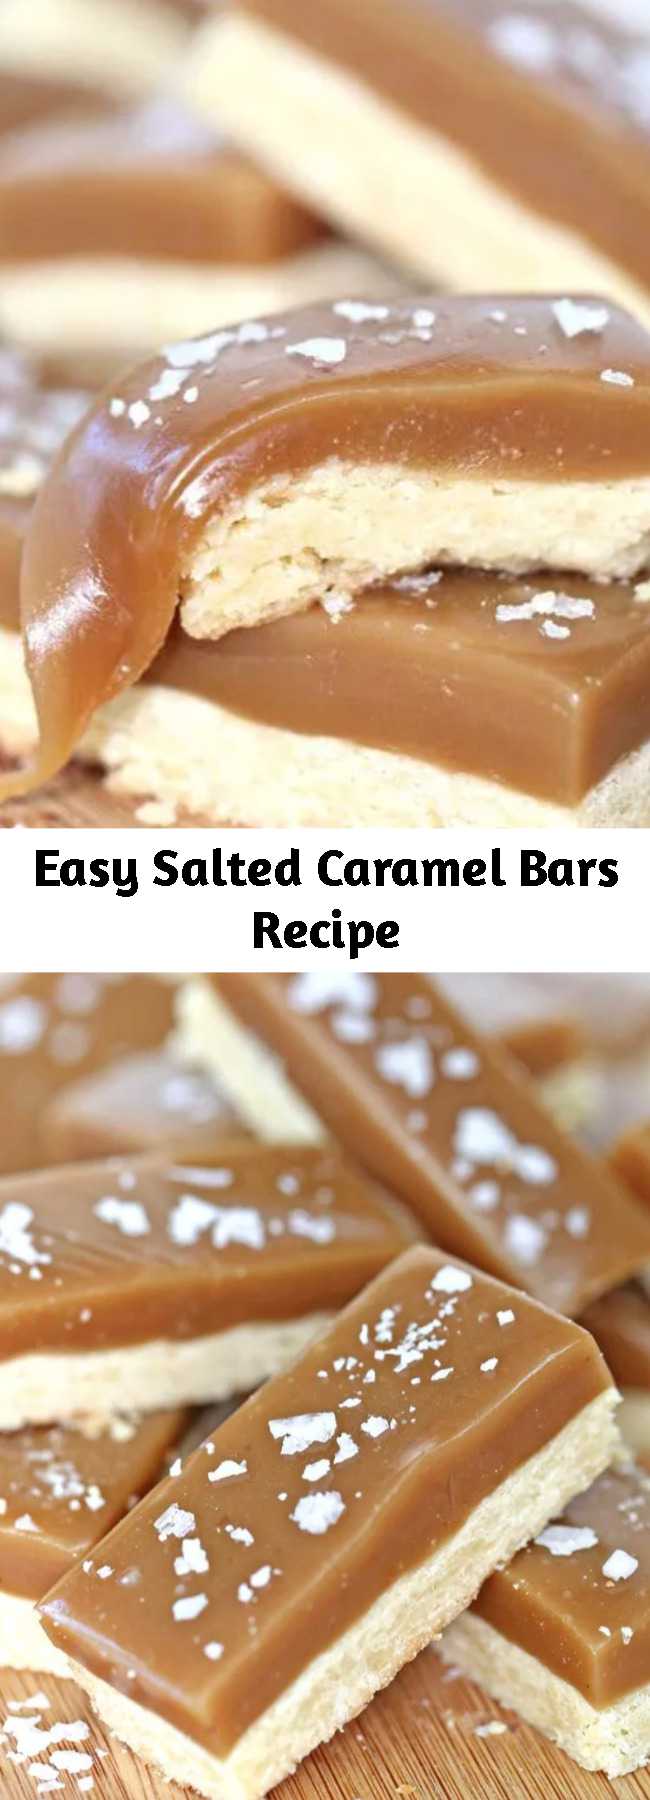 Easy Salted Caramel Bars Recipe - Salted Caramel Bars have a buttery shortbread base and a topping of rich, chewy caramel. A crunchy dusting of flaked sea salt on top is the perfect finishing touch! #saltedcaramel #bars